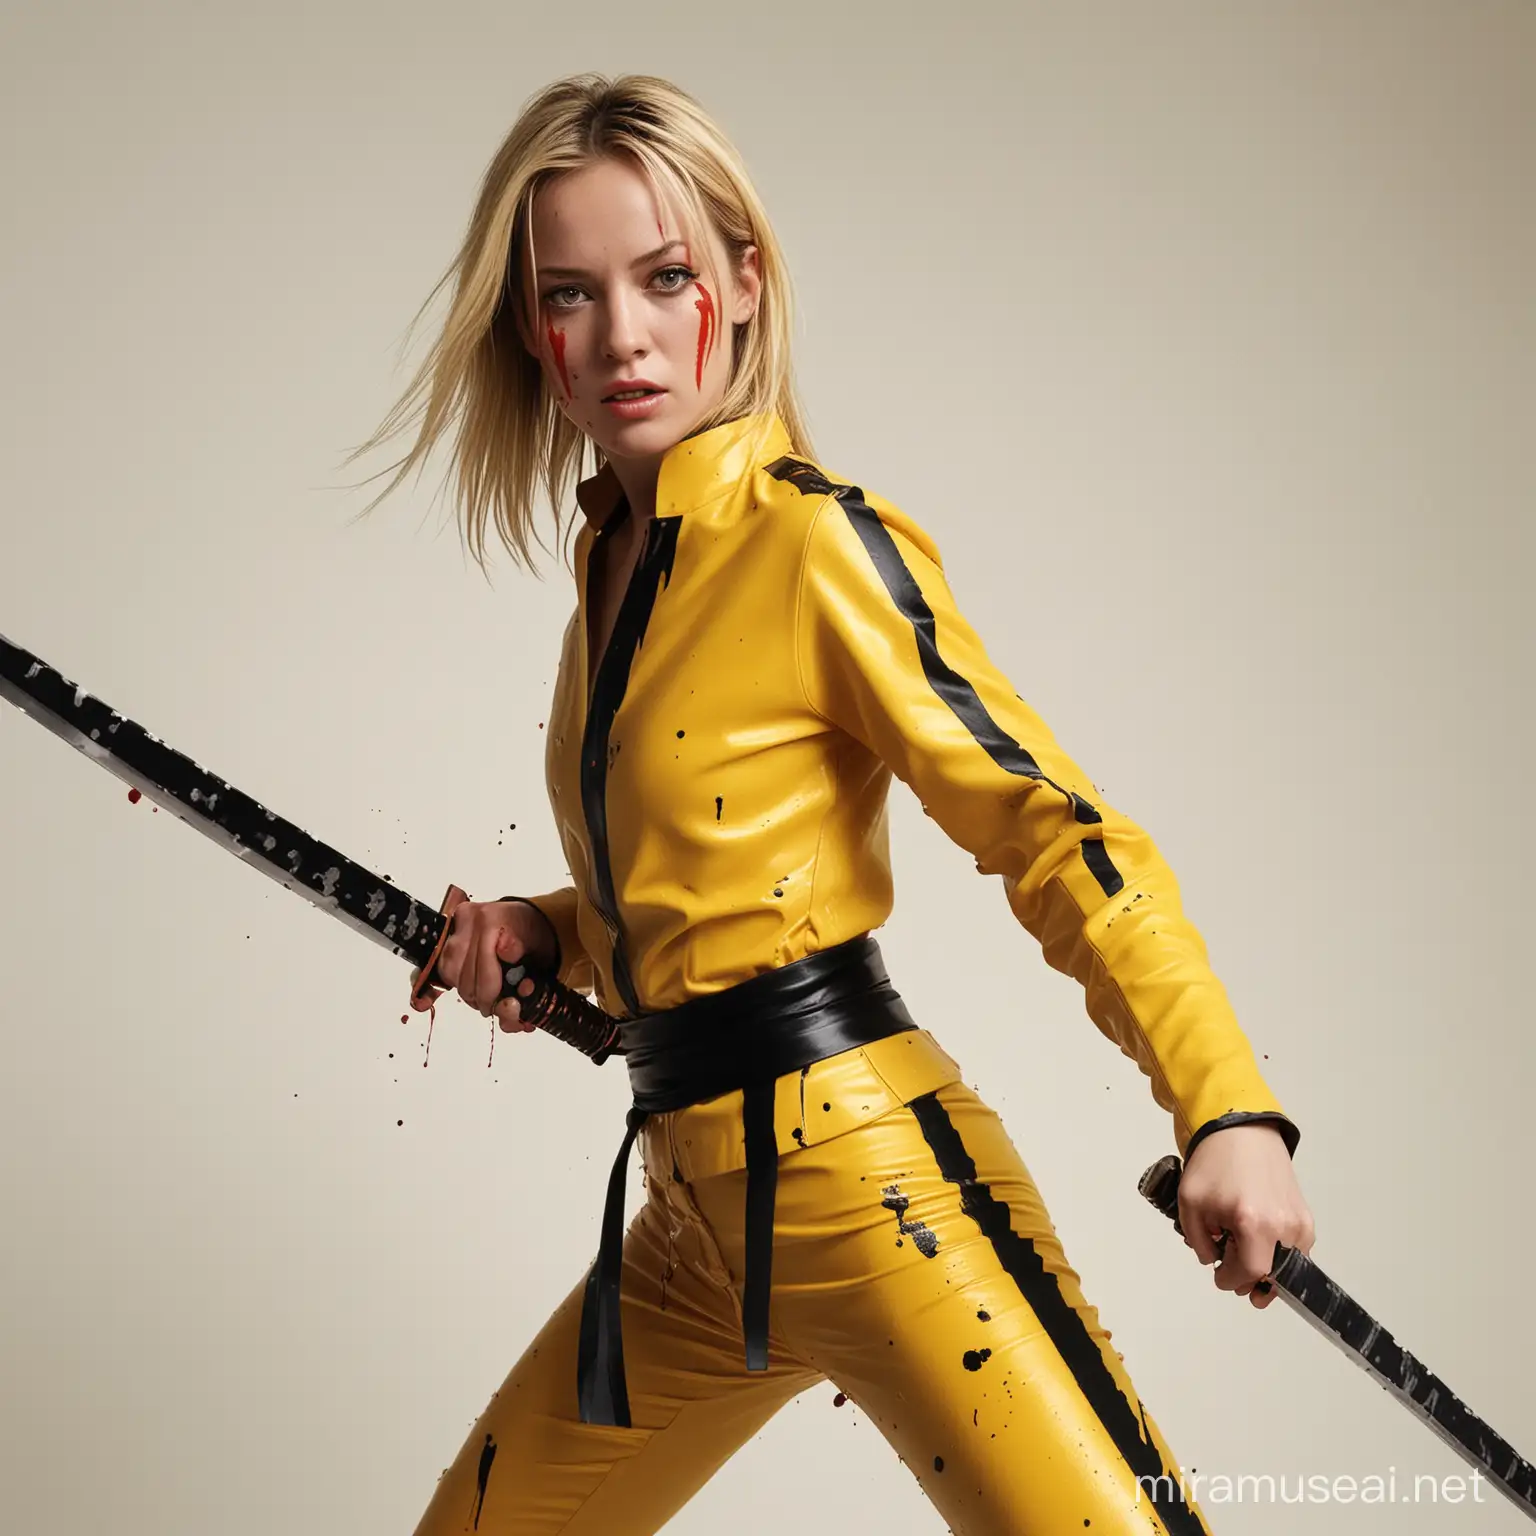 Hyper detailed realistic photography of image for the film kill bill ep. 2 featuring the female main character in a yellow costume with black stripes playing a katana, the texture and color are very firm and clear, white background with red paint spots,